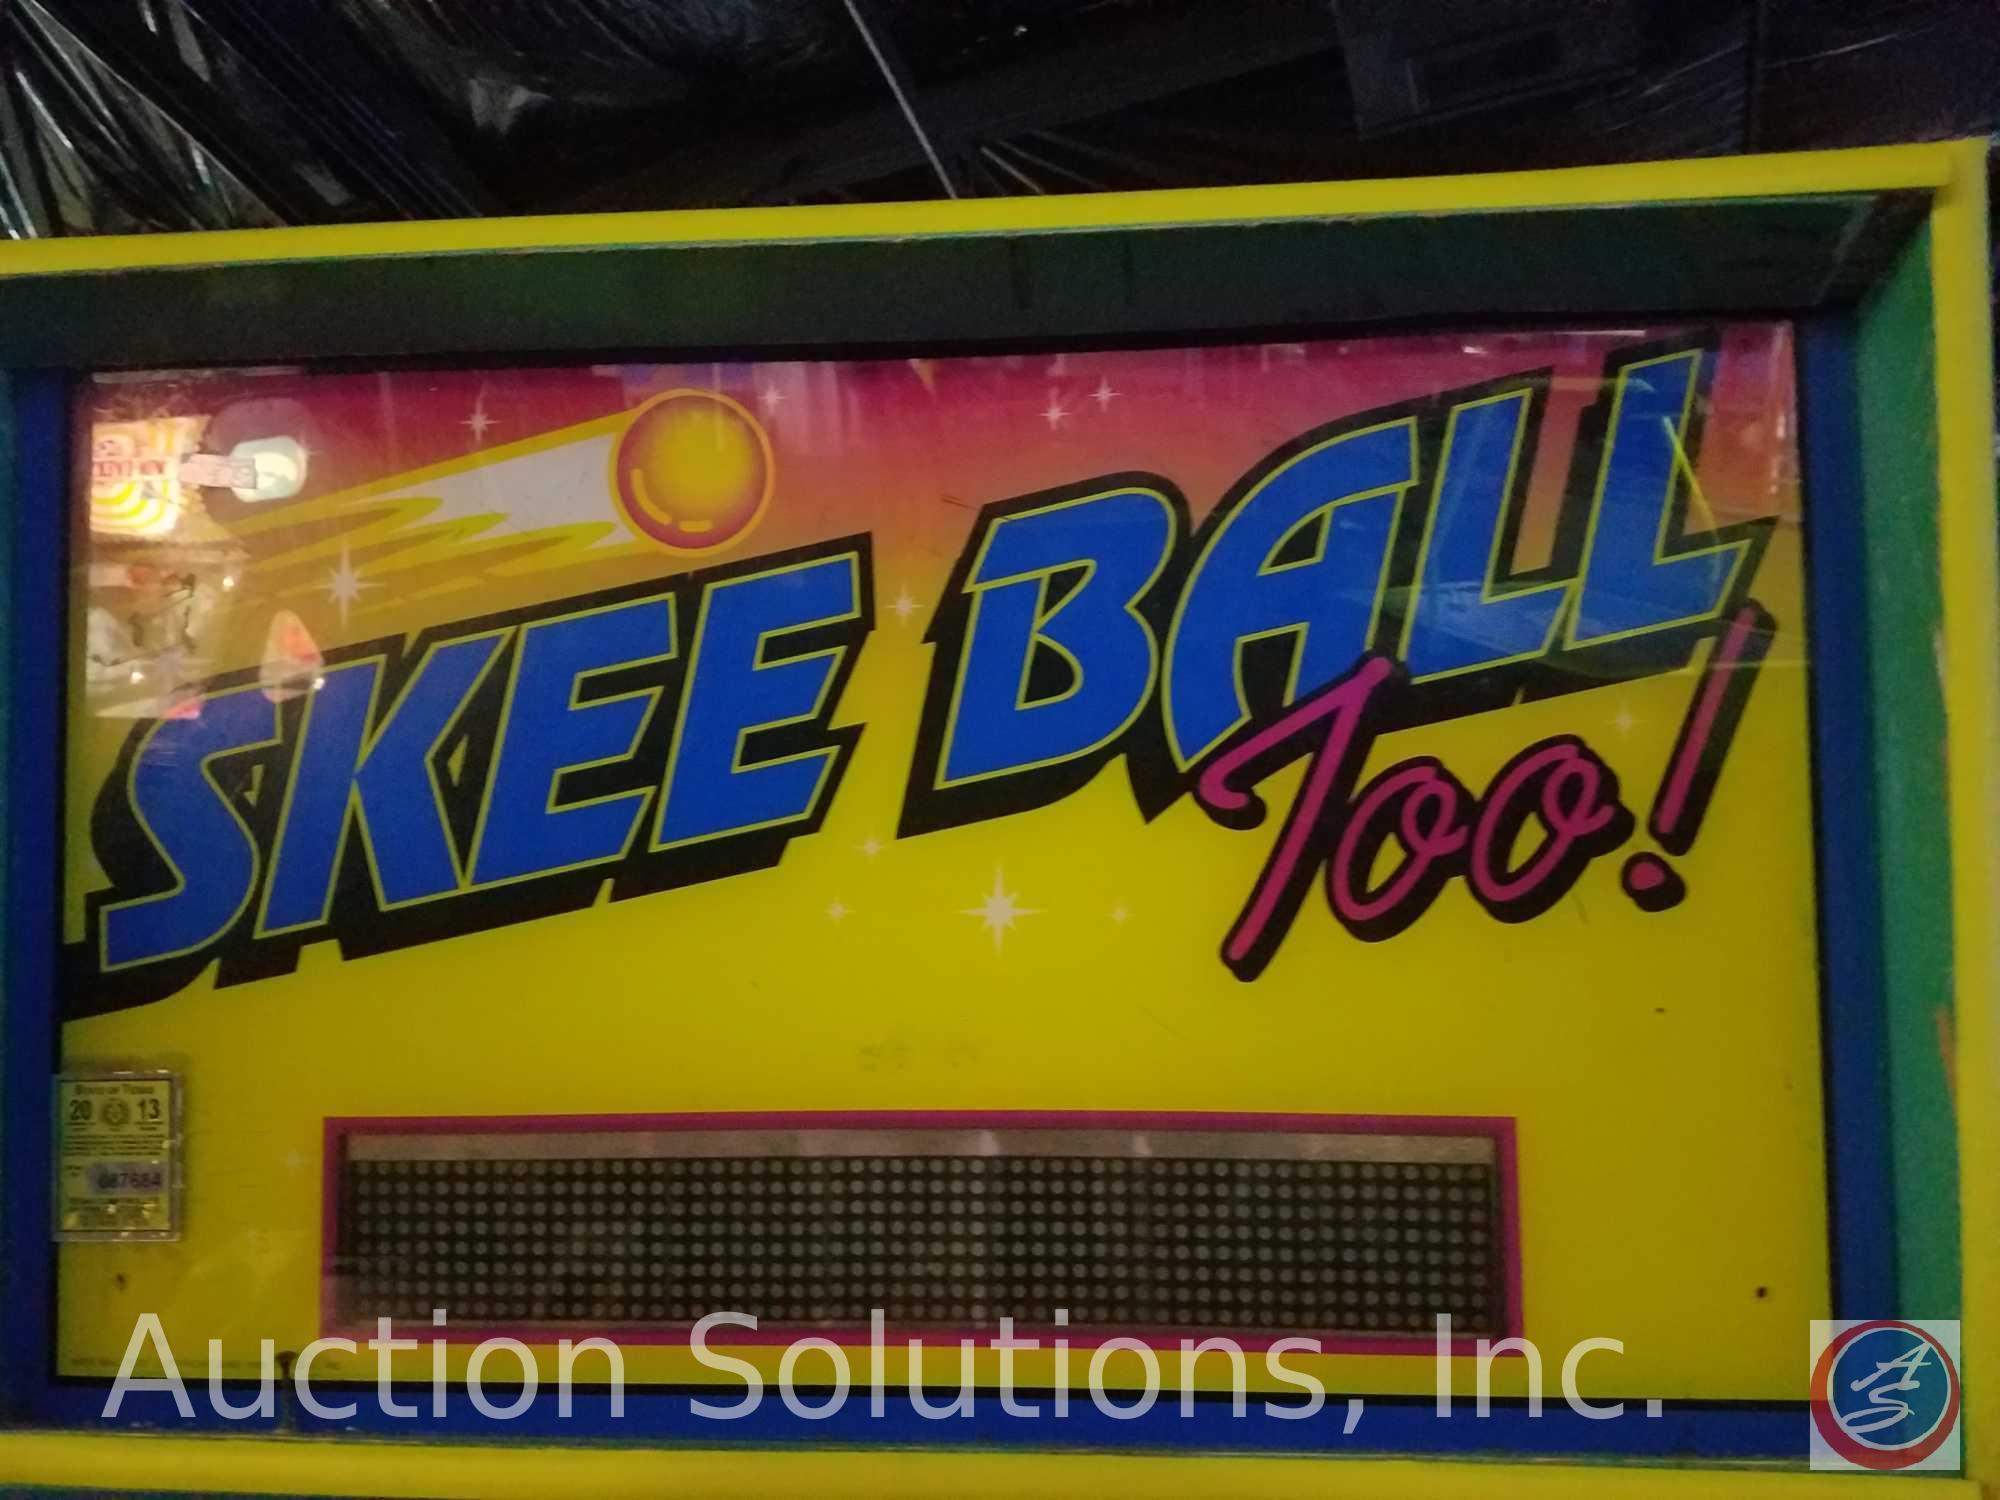 Skee Ball Too Arcade Game with Intercard Reader Serial No. 970314324 Model No. N175N3AXOJM {{SOME